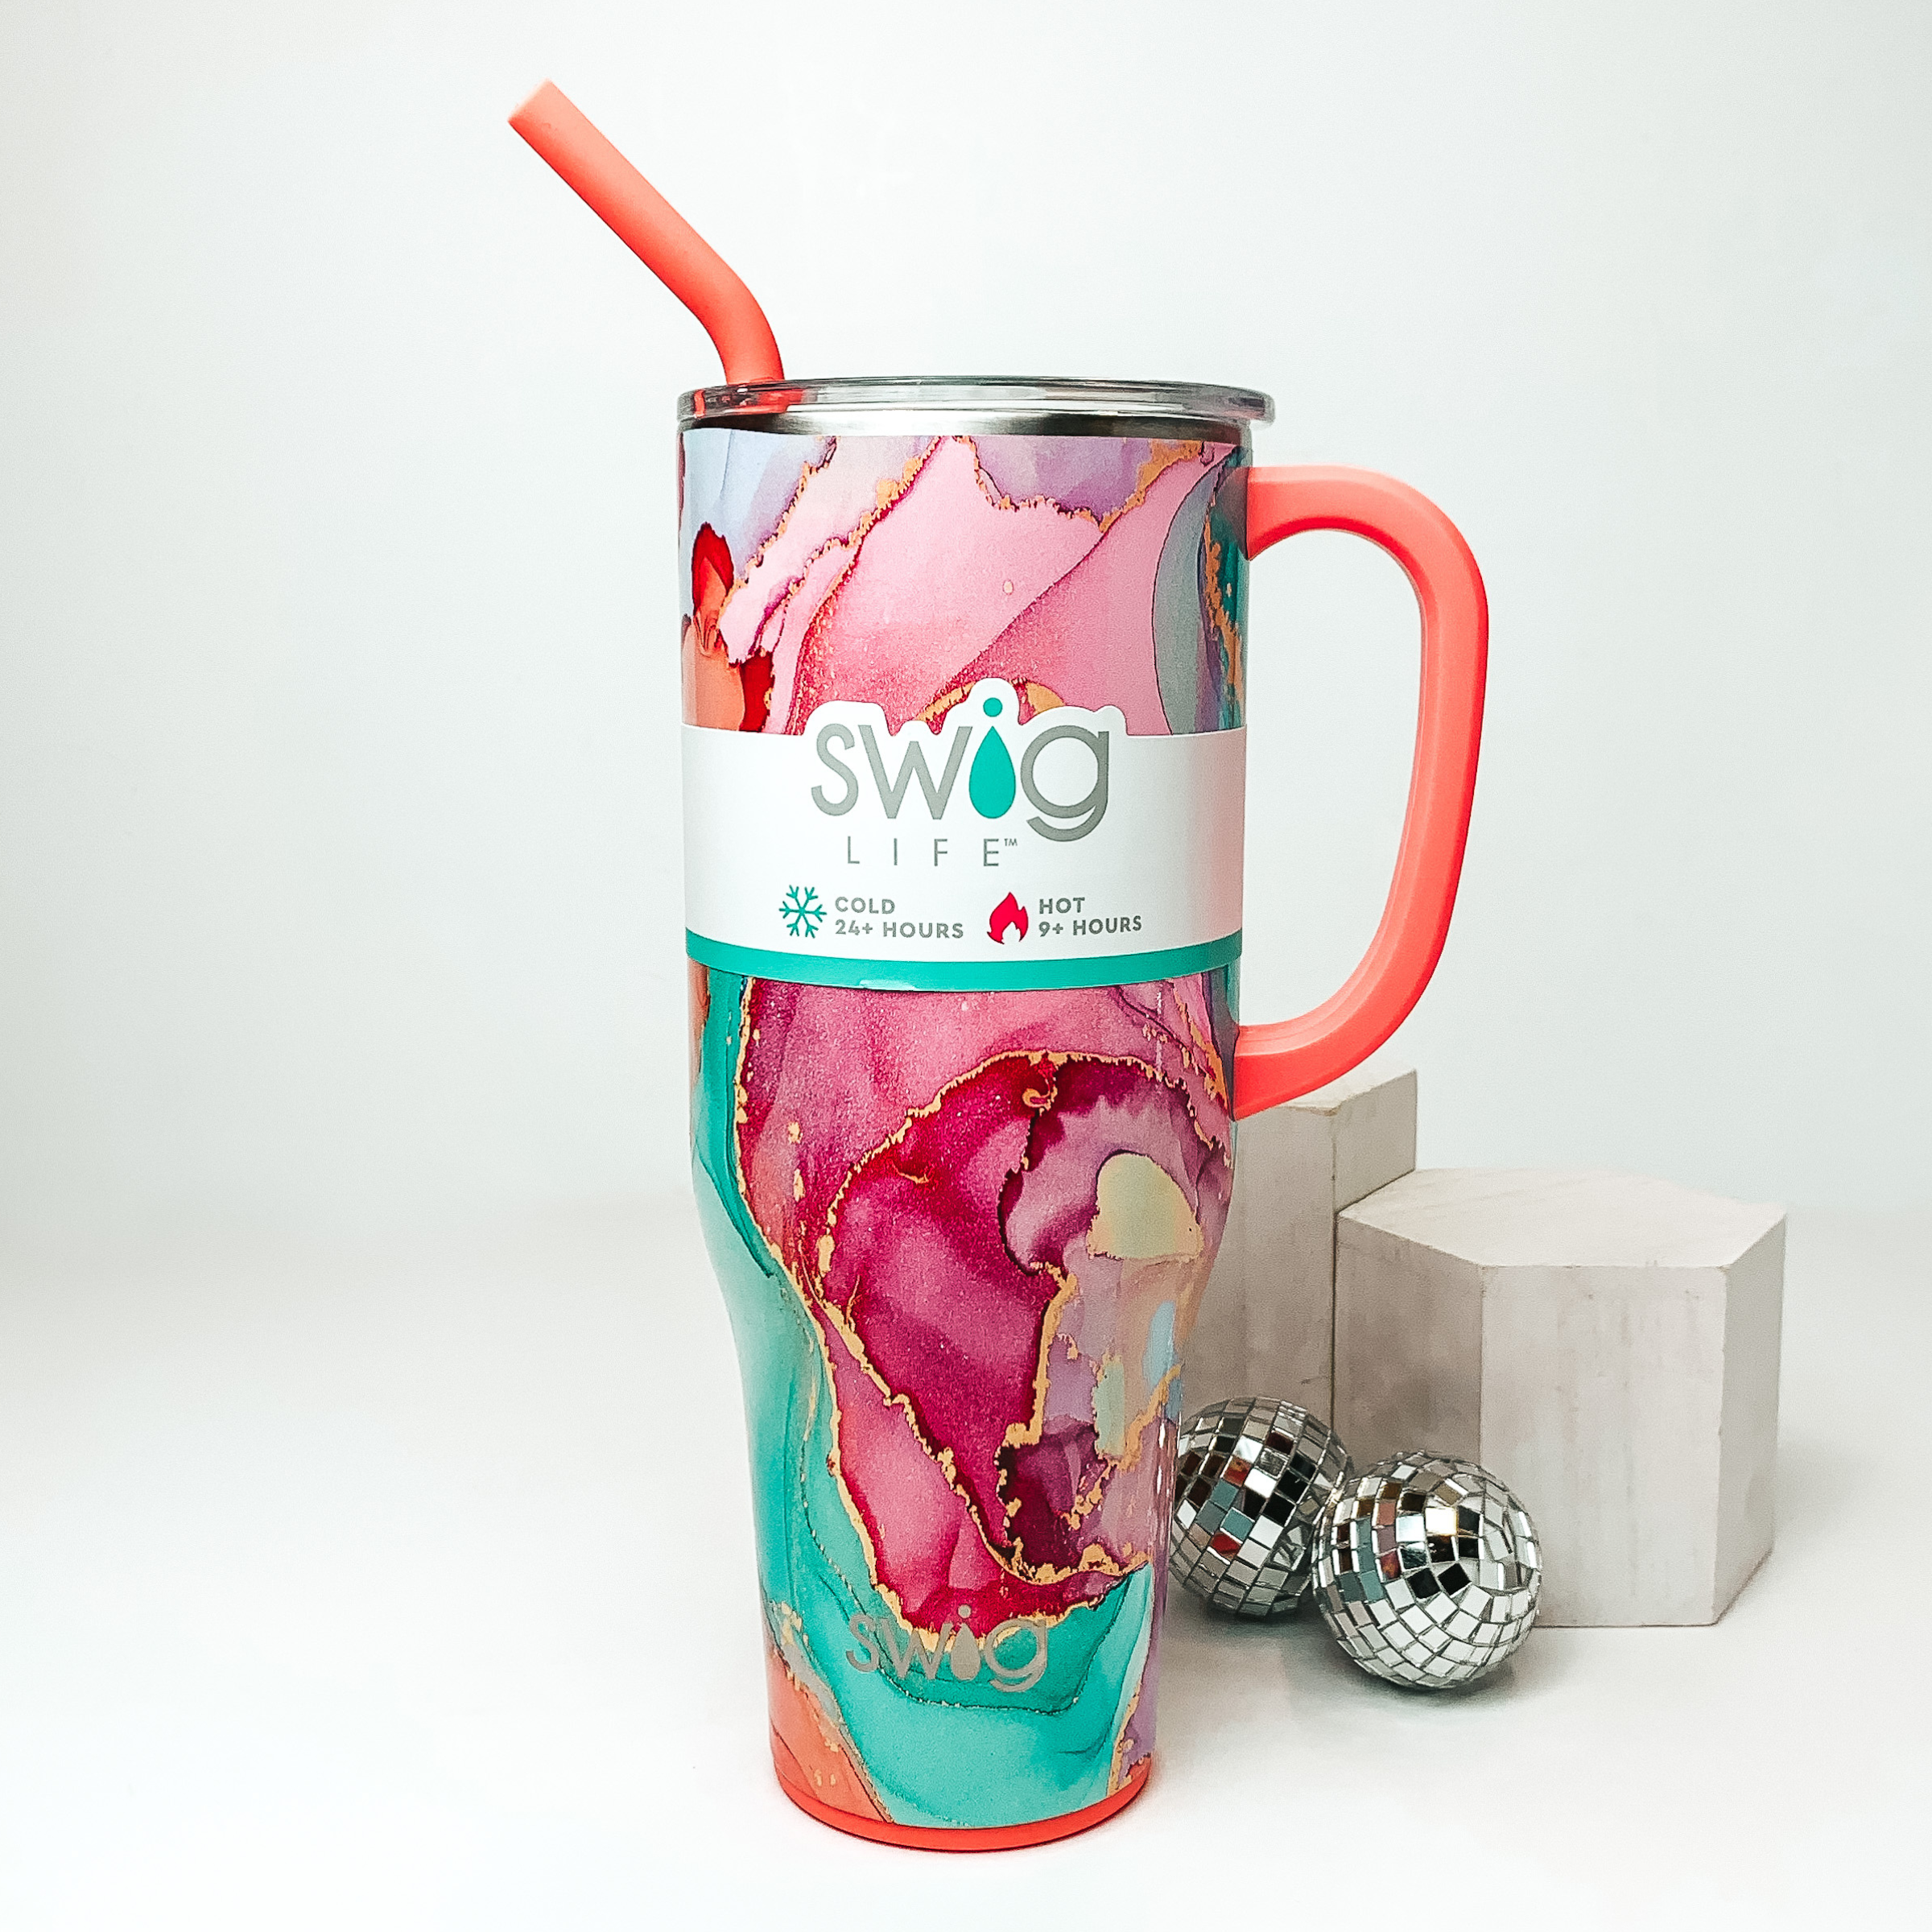 A tall 40 oz mug with a salmon straw and handle, clear lid, and a multi-color pattern containing light blue, pink, purple, white, and orange with a gold outline between each color. Item is pictured on a plain white background